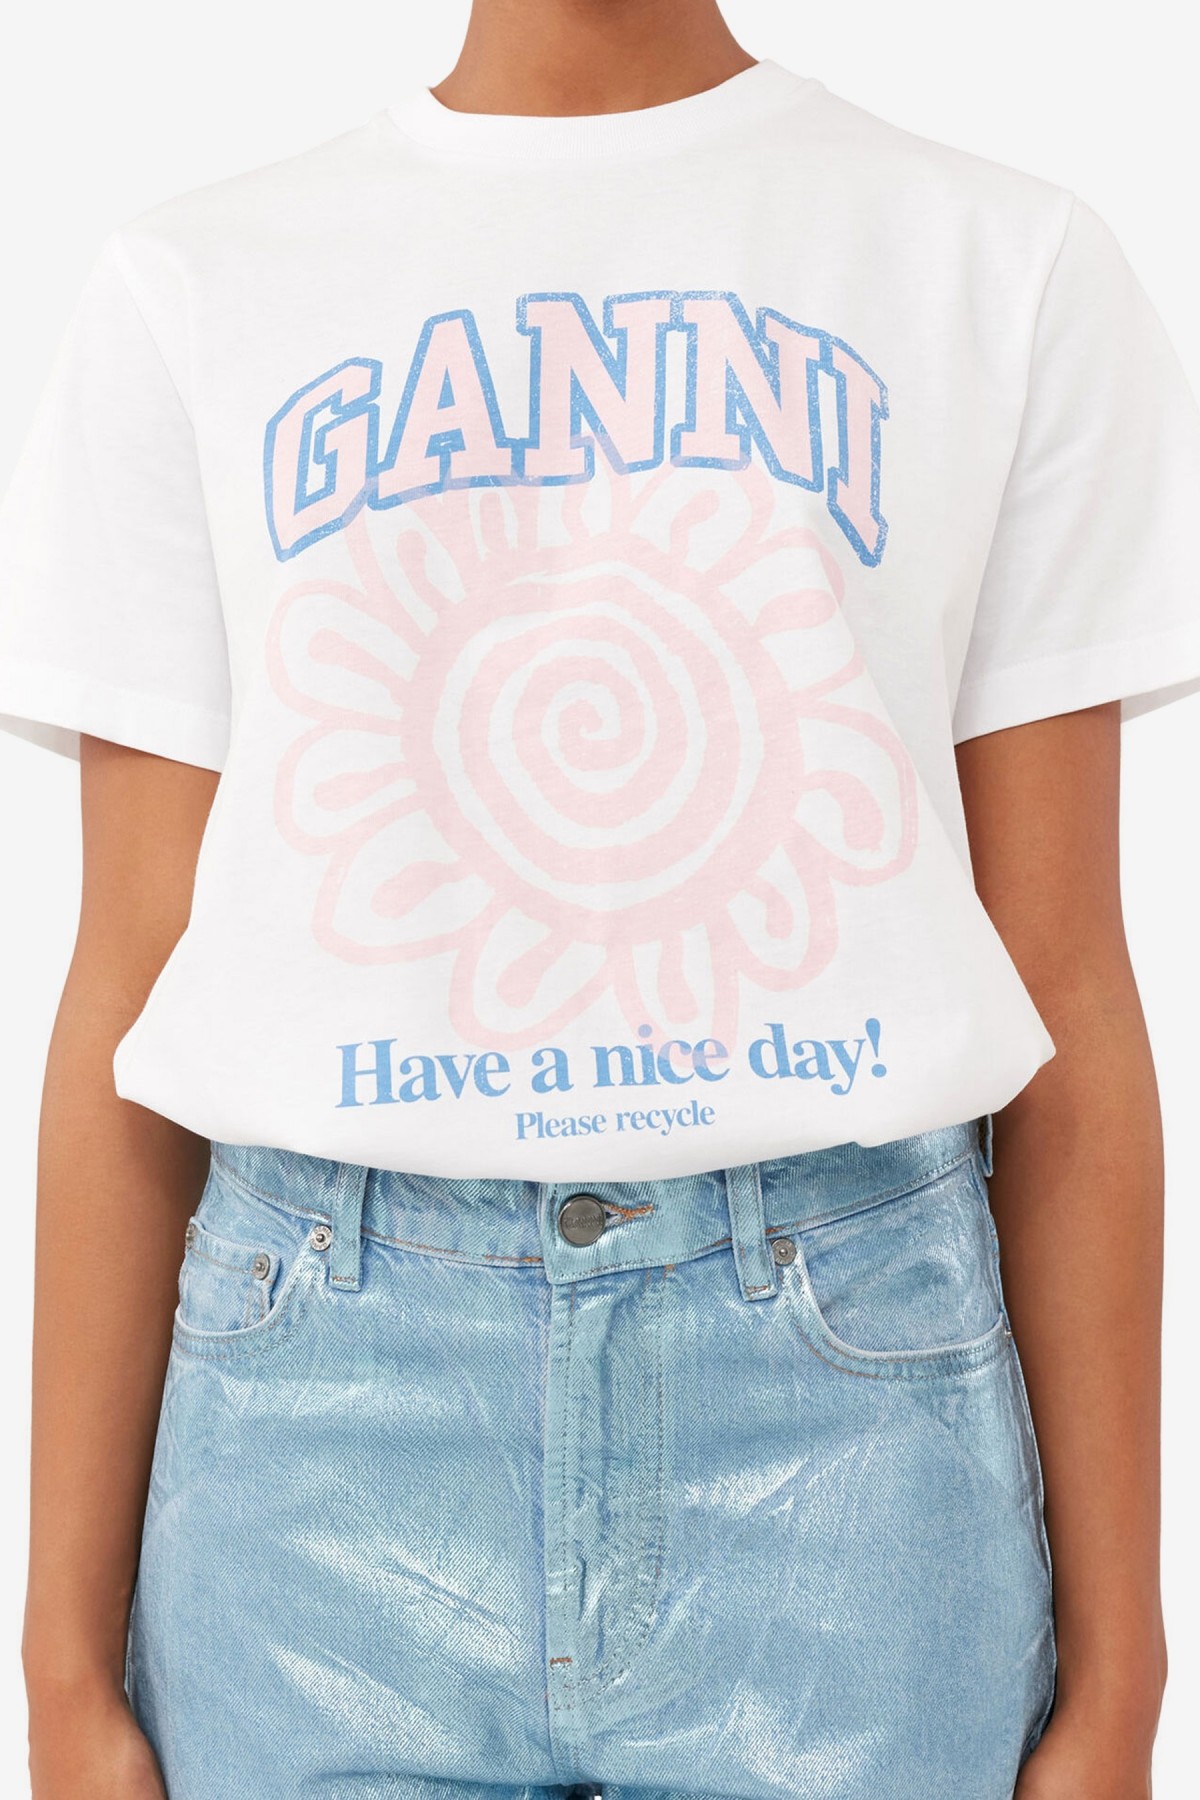 Ganni Basic Jersey Flower Relaxed T-shirt in Bright White